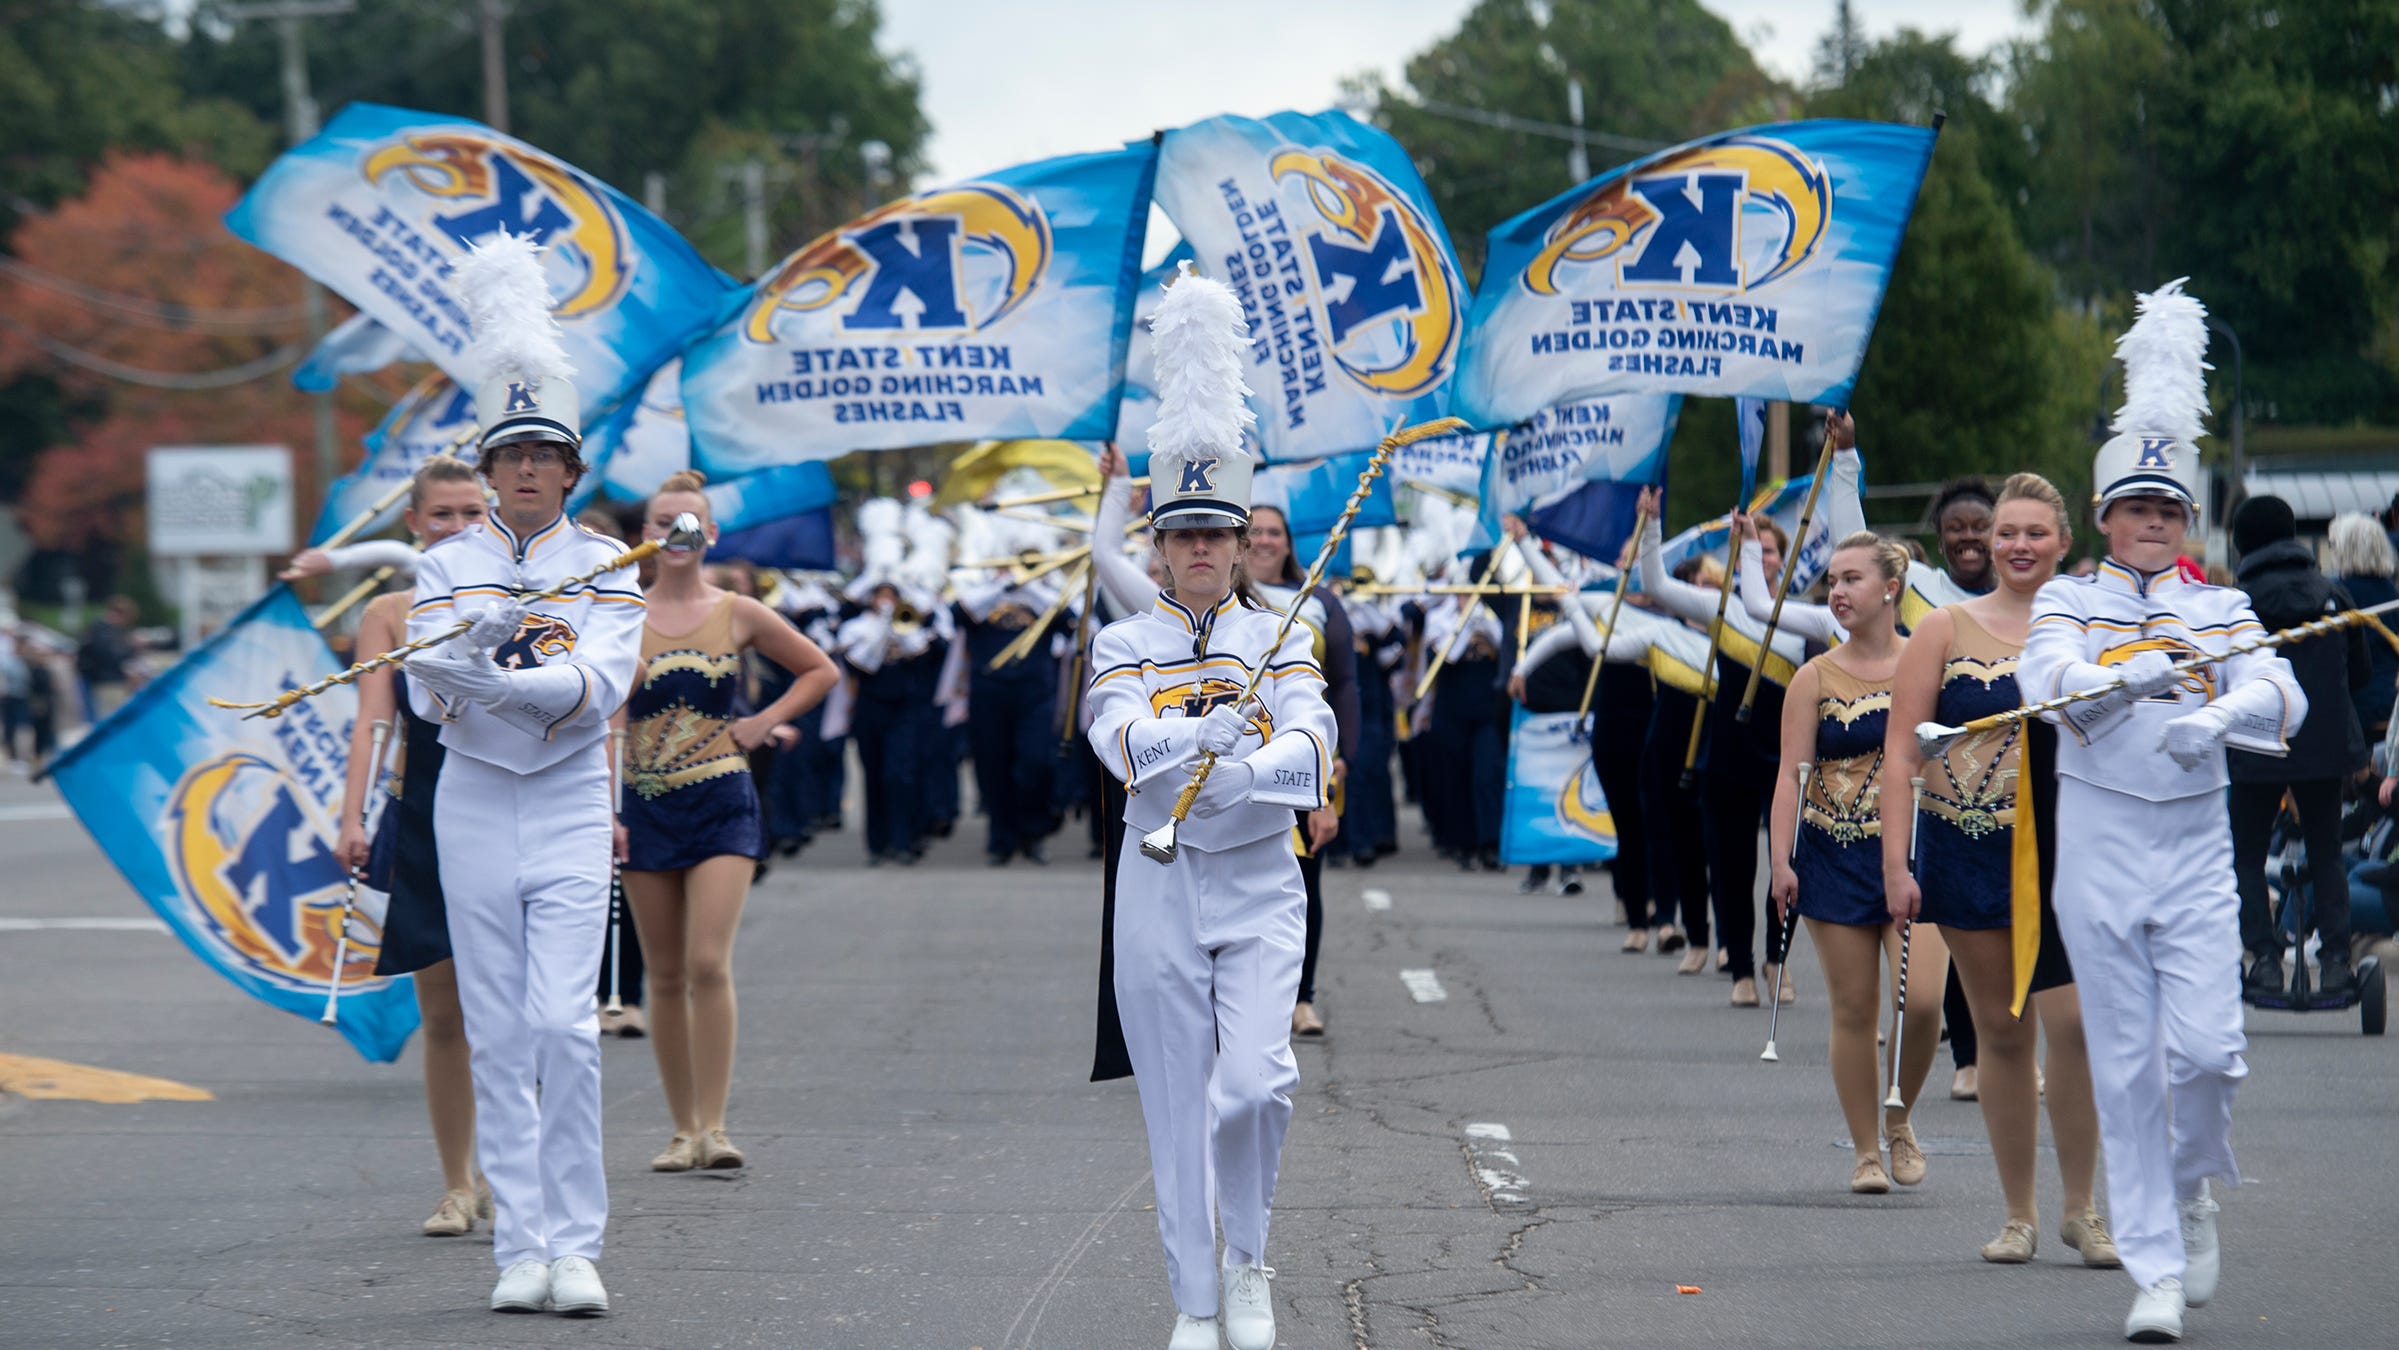 Kent State includes parade, 5K race and football game